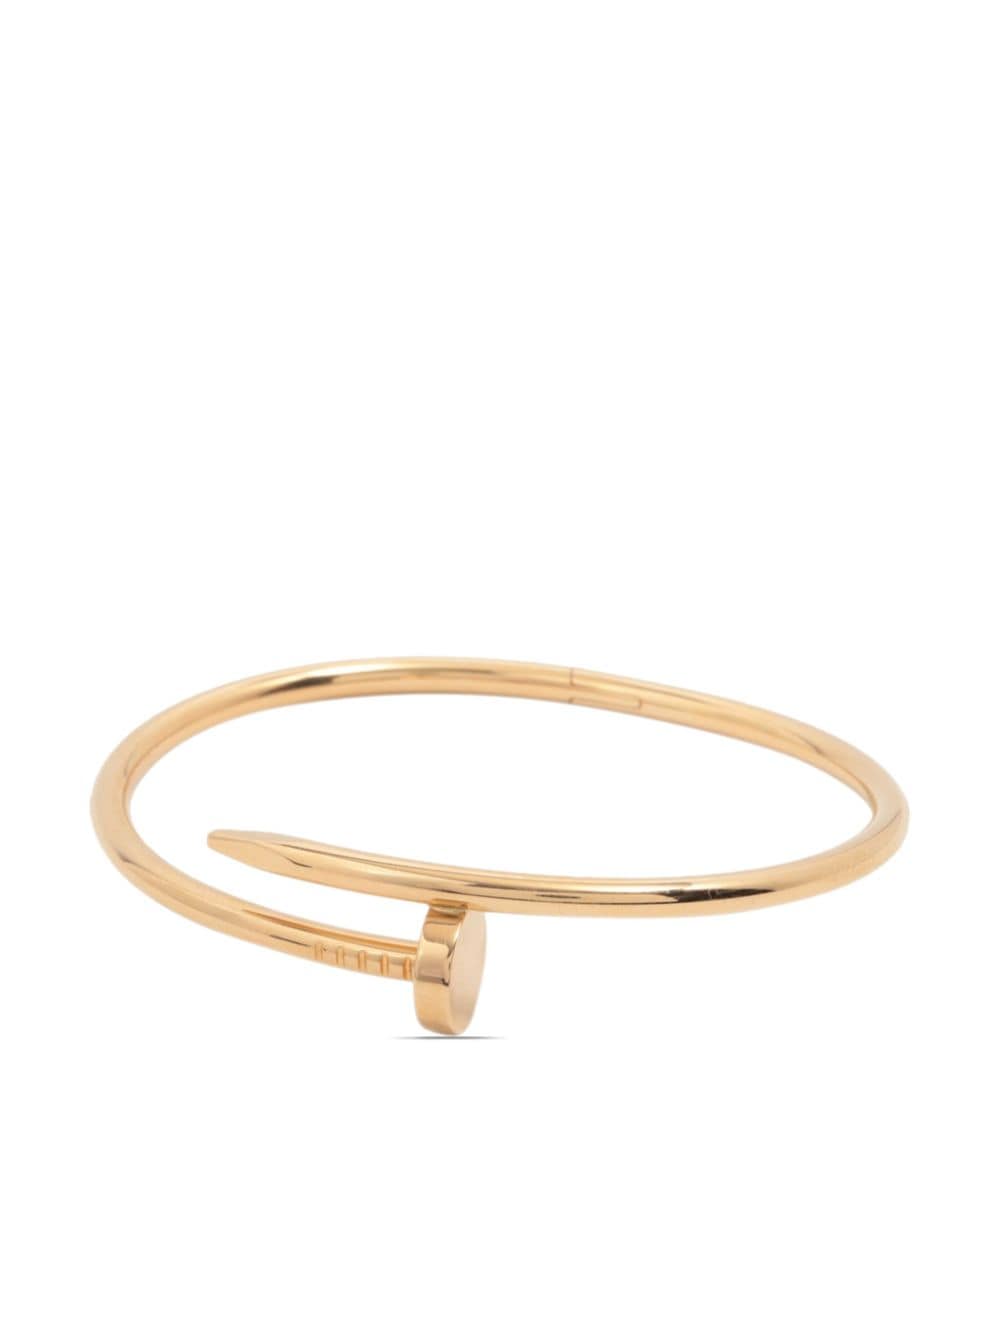 Pre-owned Cartier 18kt Yellow Gold Nail Bracelet